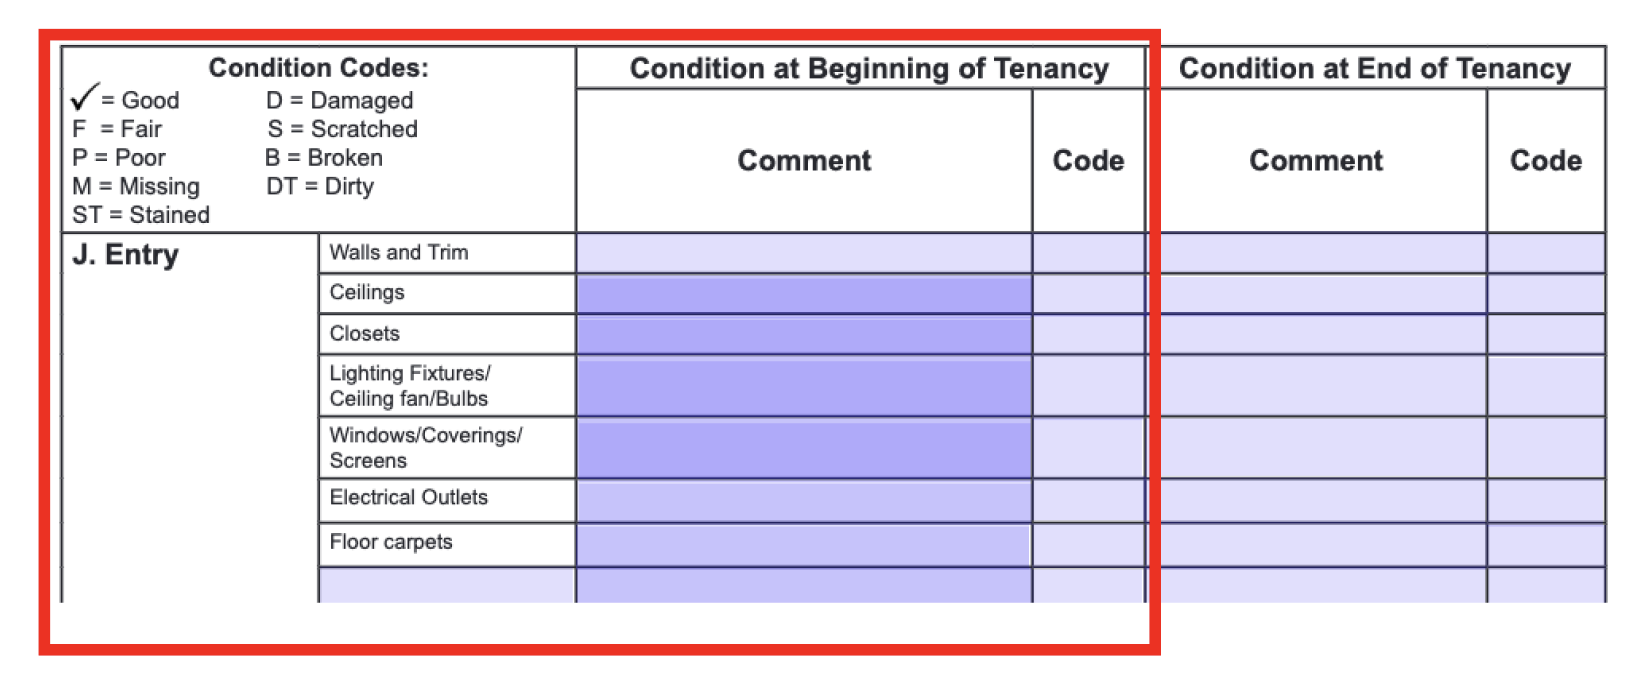 Screenshot of the "condition at beginning of tenancy" section of the condition inspection form